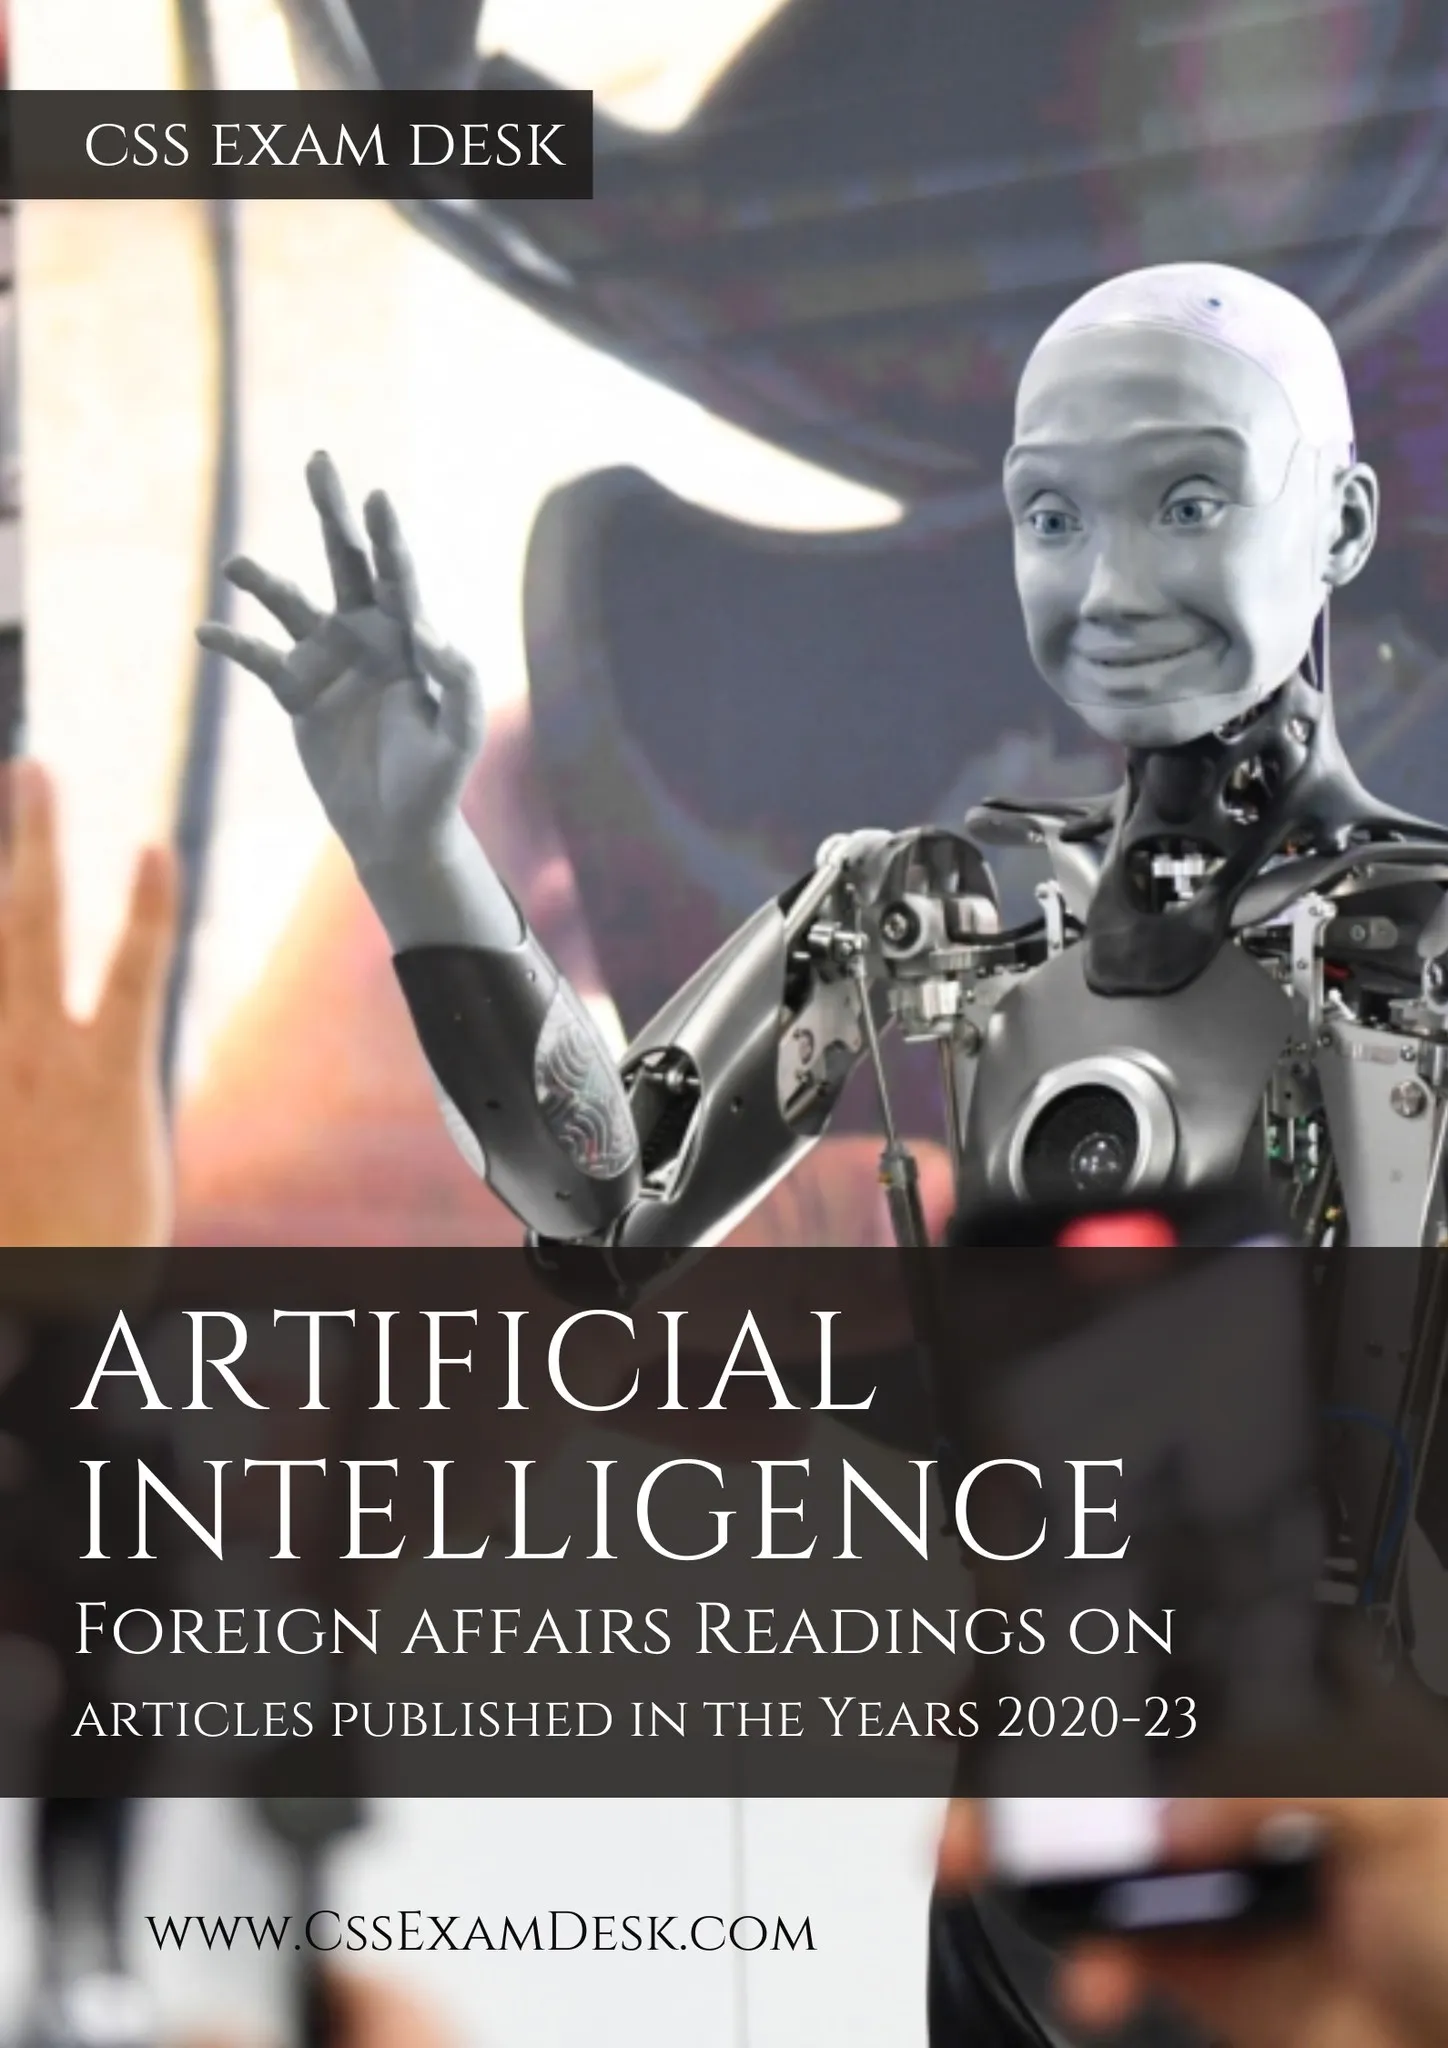 Readings on Artificial Intelligence (AI)